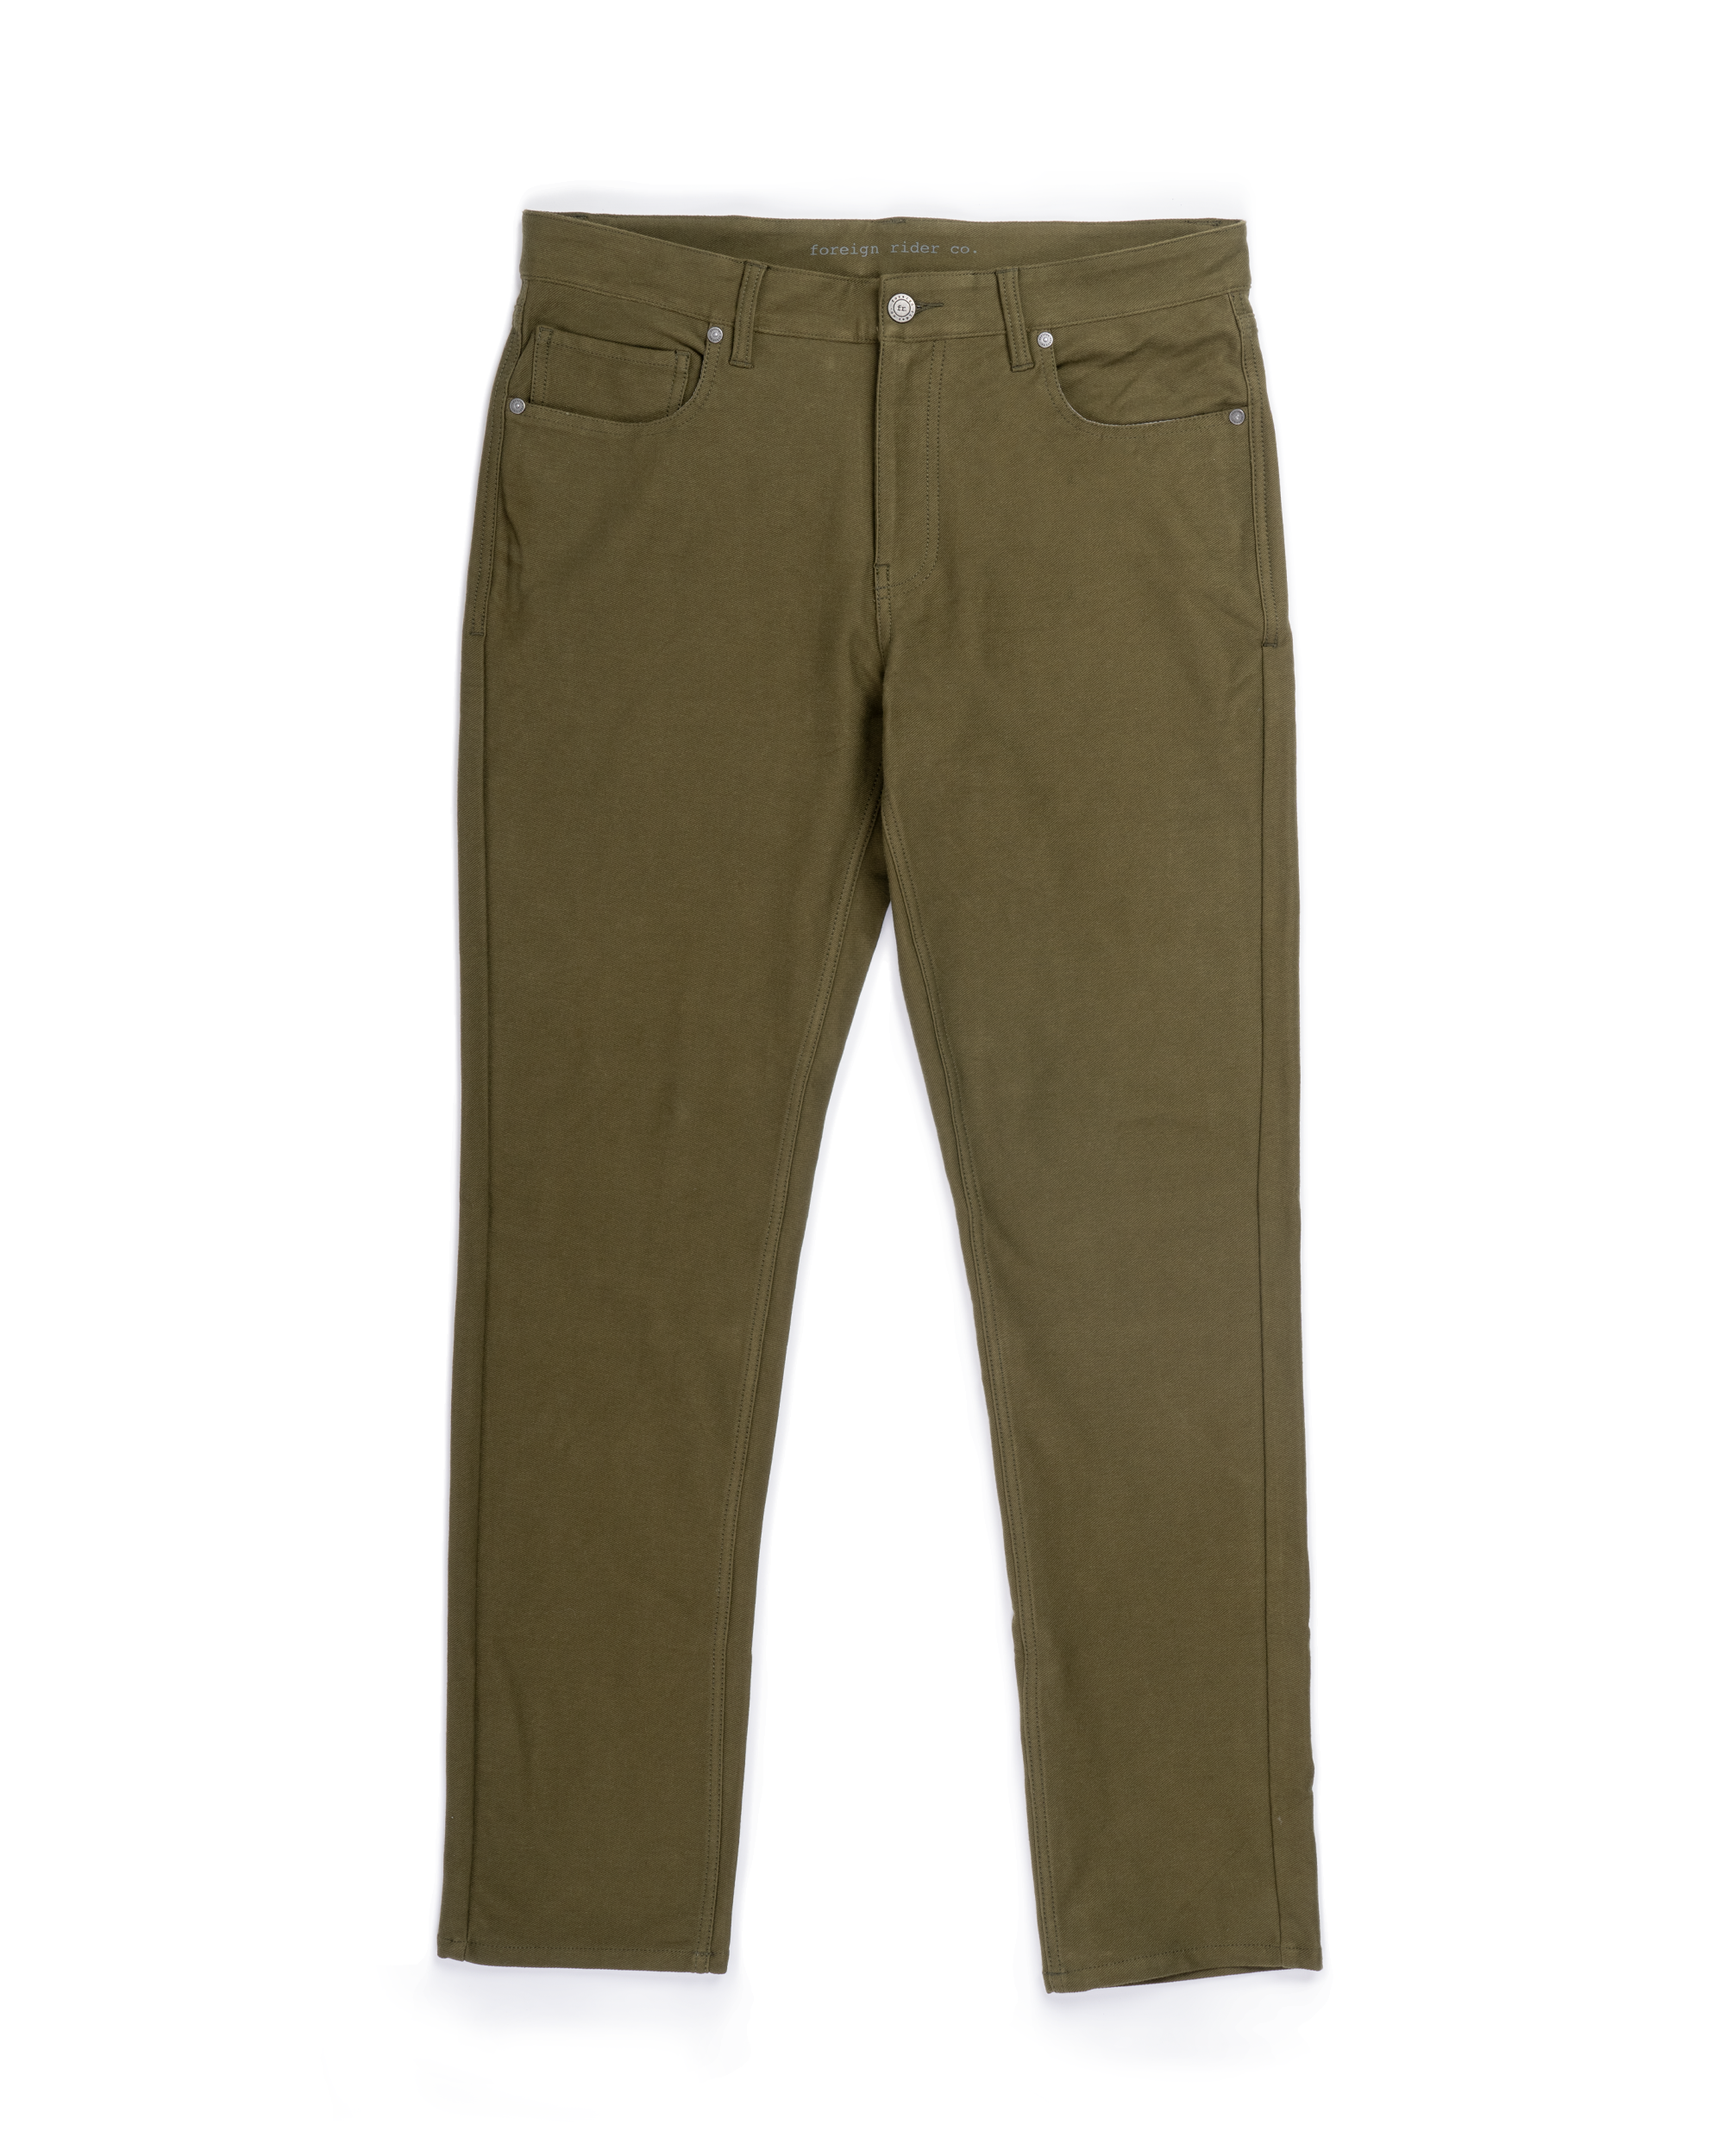 5 Pocket Organic Cotton Pant Olive - Foreign Rider Co.